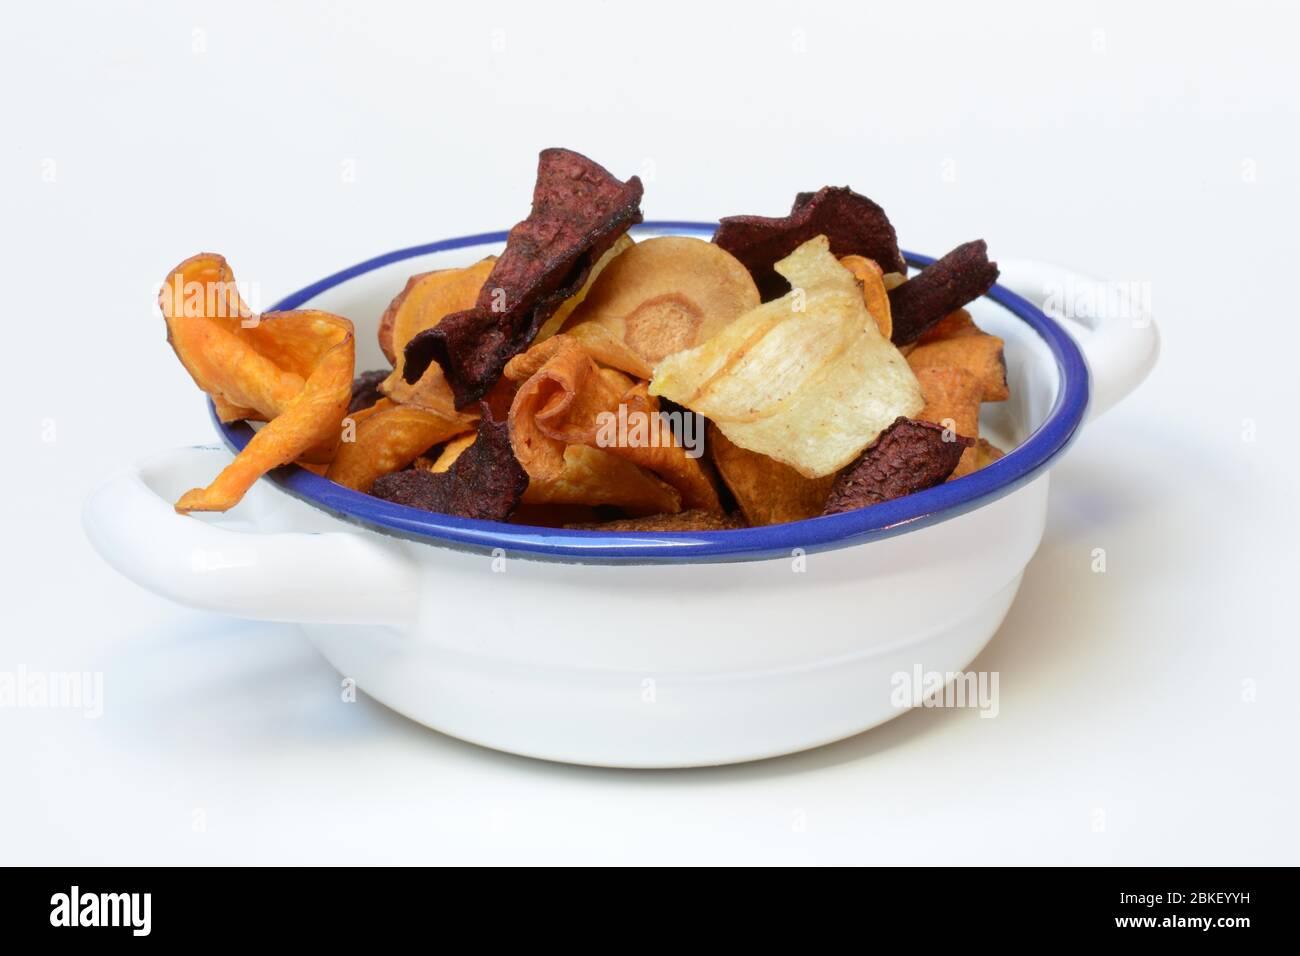 Vegetable chips in shell, food photography, studio shot, Germany Stock Photo